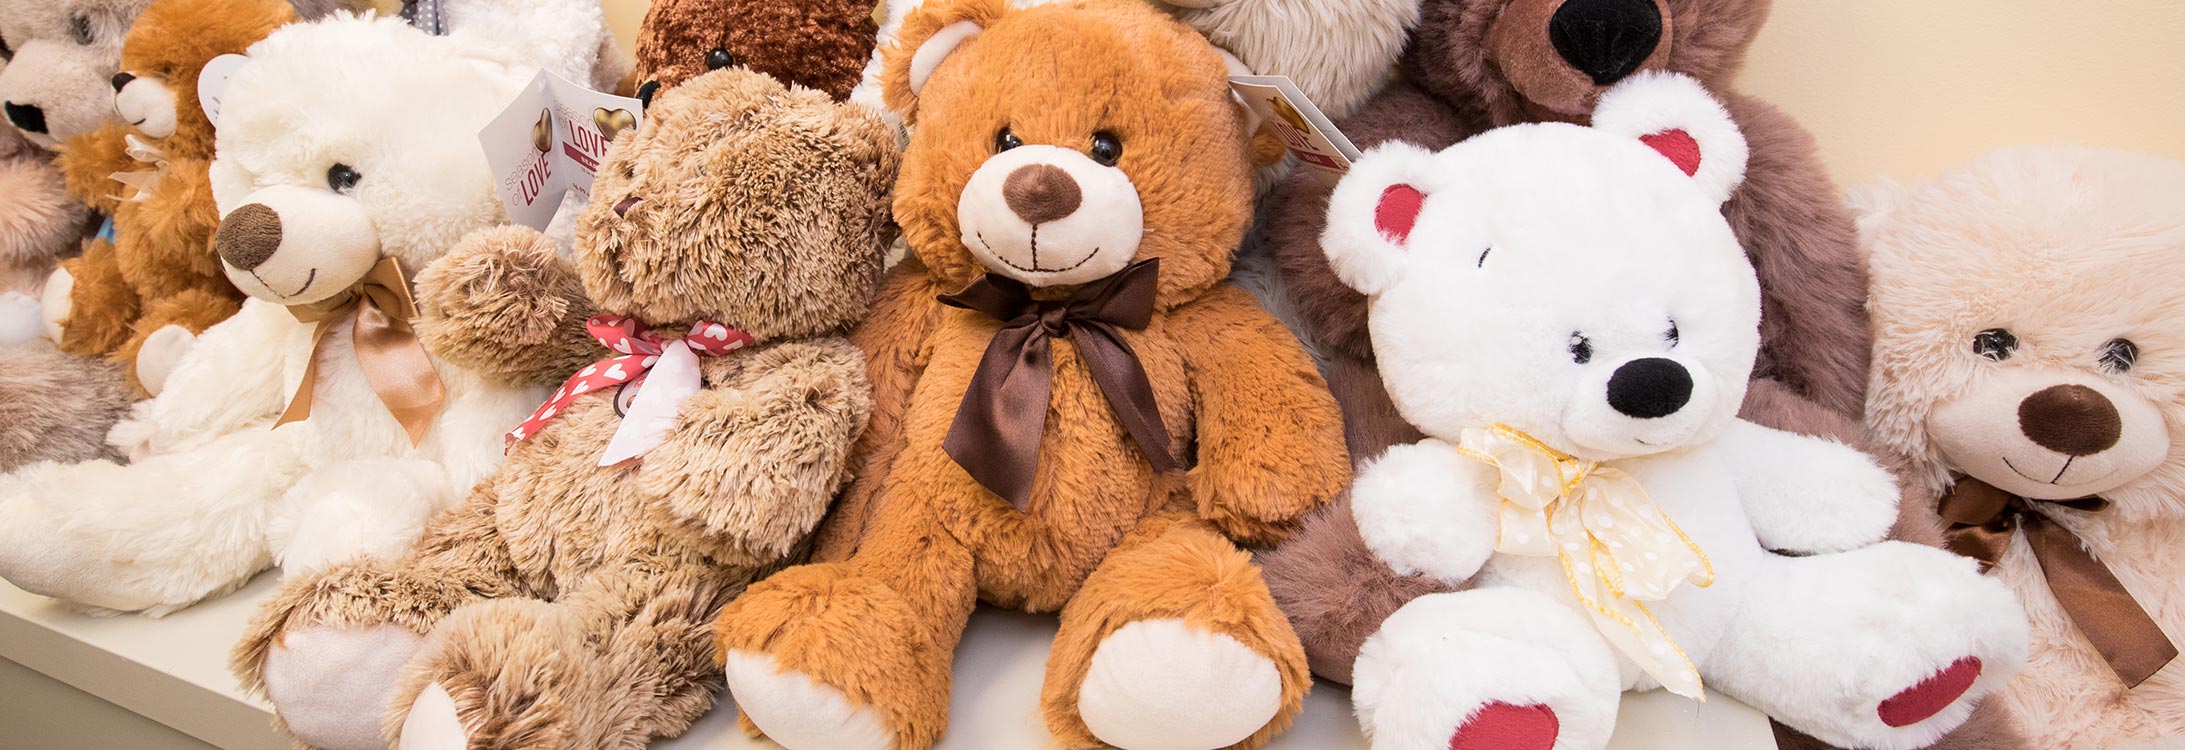 What To Expect From Your Visit, TEDI BEAR Children's Advocacy Center